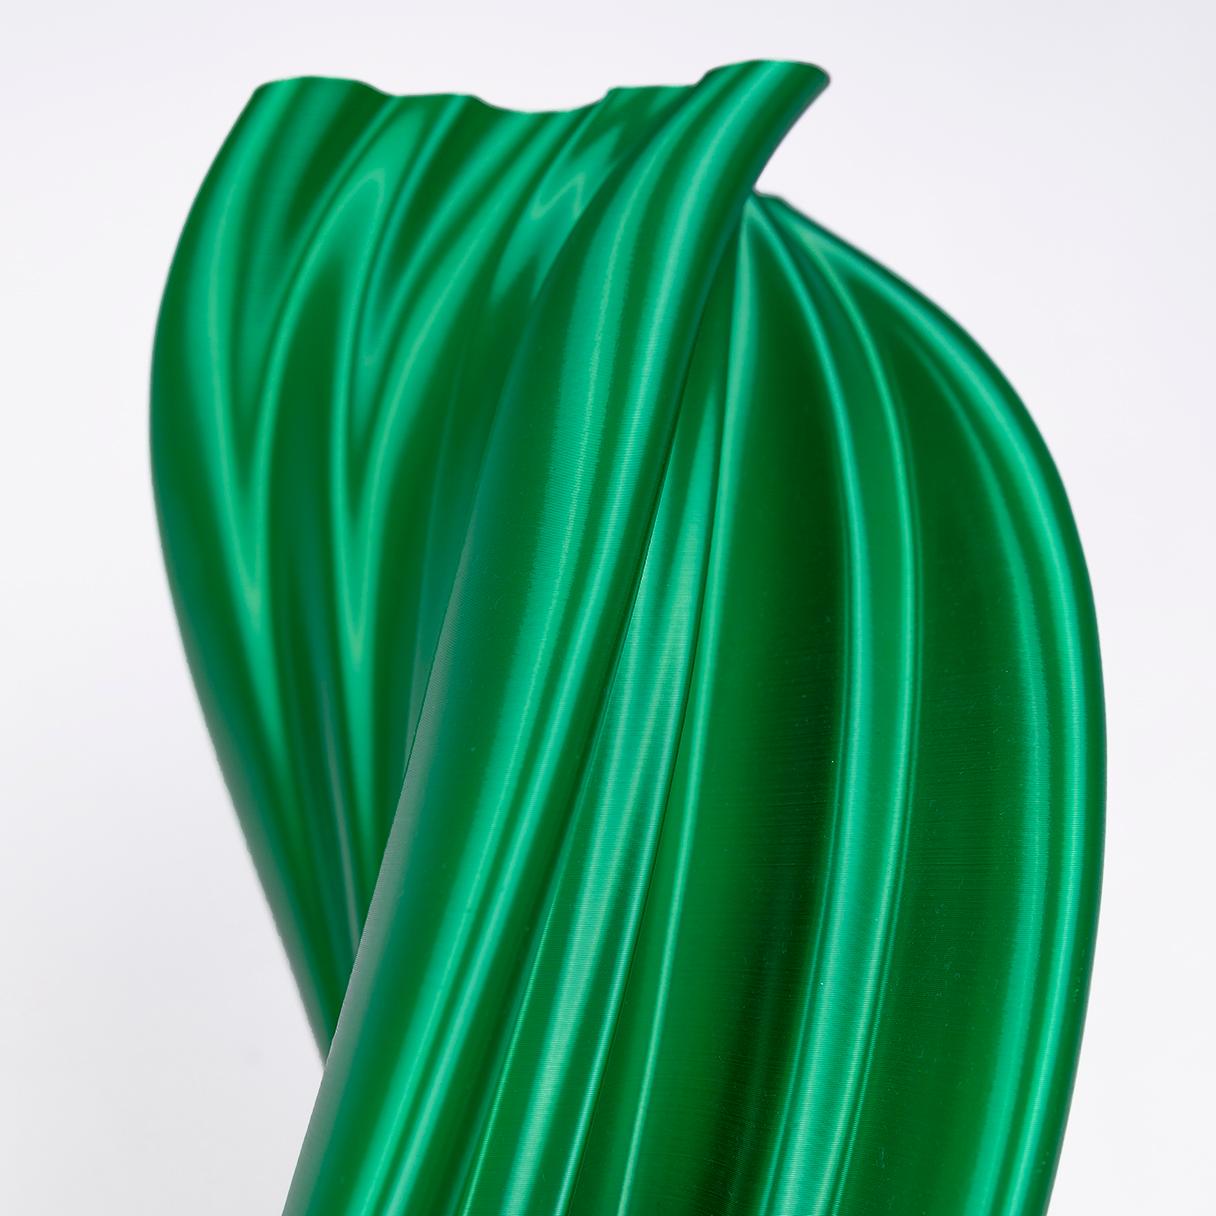 Damocle, Green Contemporary Sustainable Vase-Sculpture For Sale 3